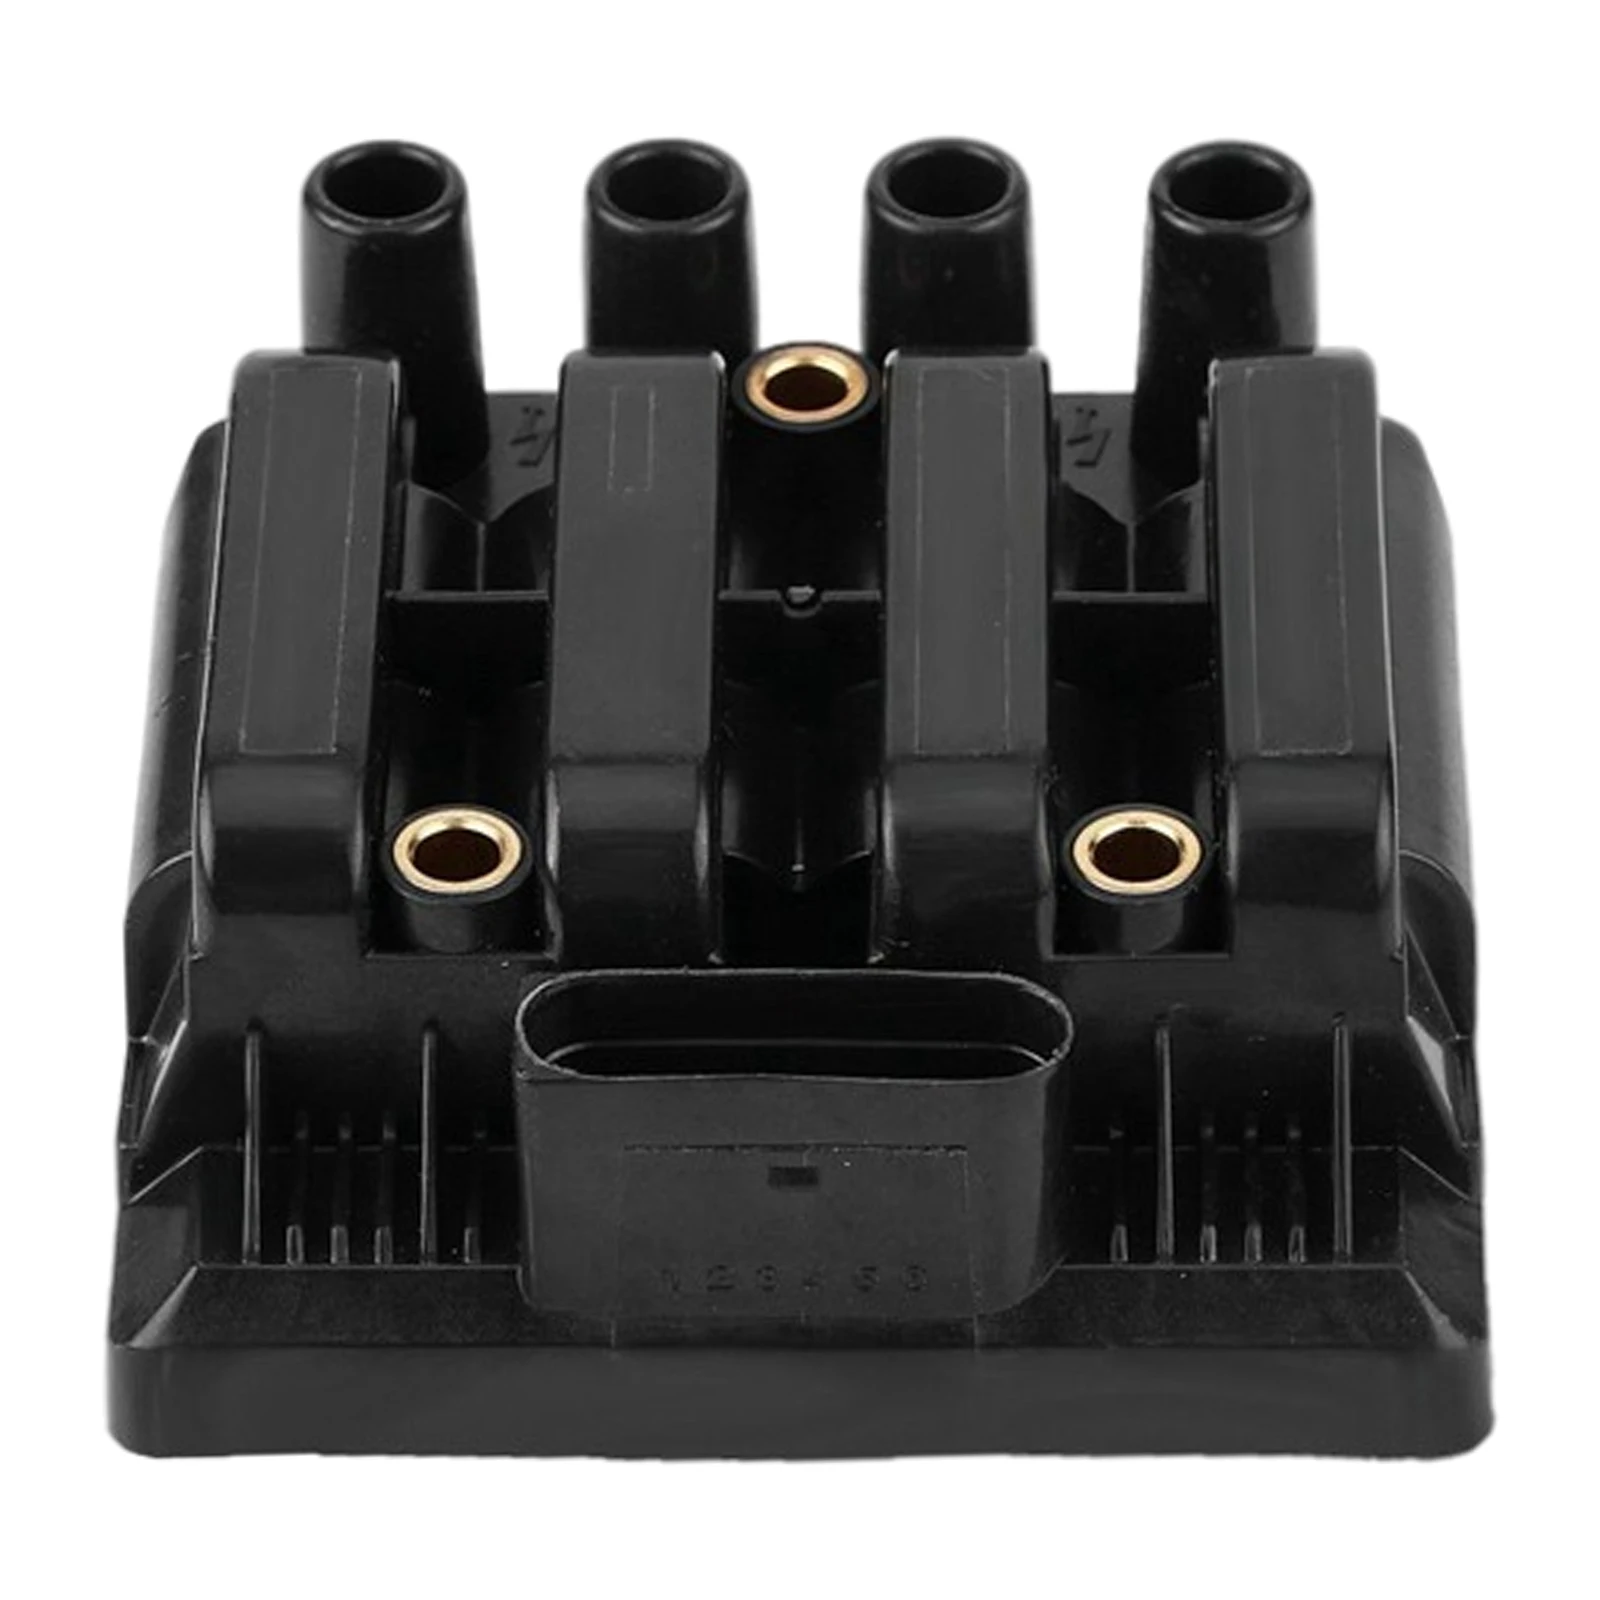 Portable Spare Car Ignition Coil UF484 For VW Jetta Beetle L4 2.0L C1393 2004 2005 Car Accessories